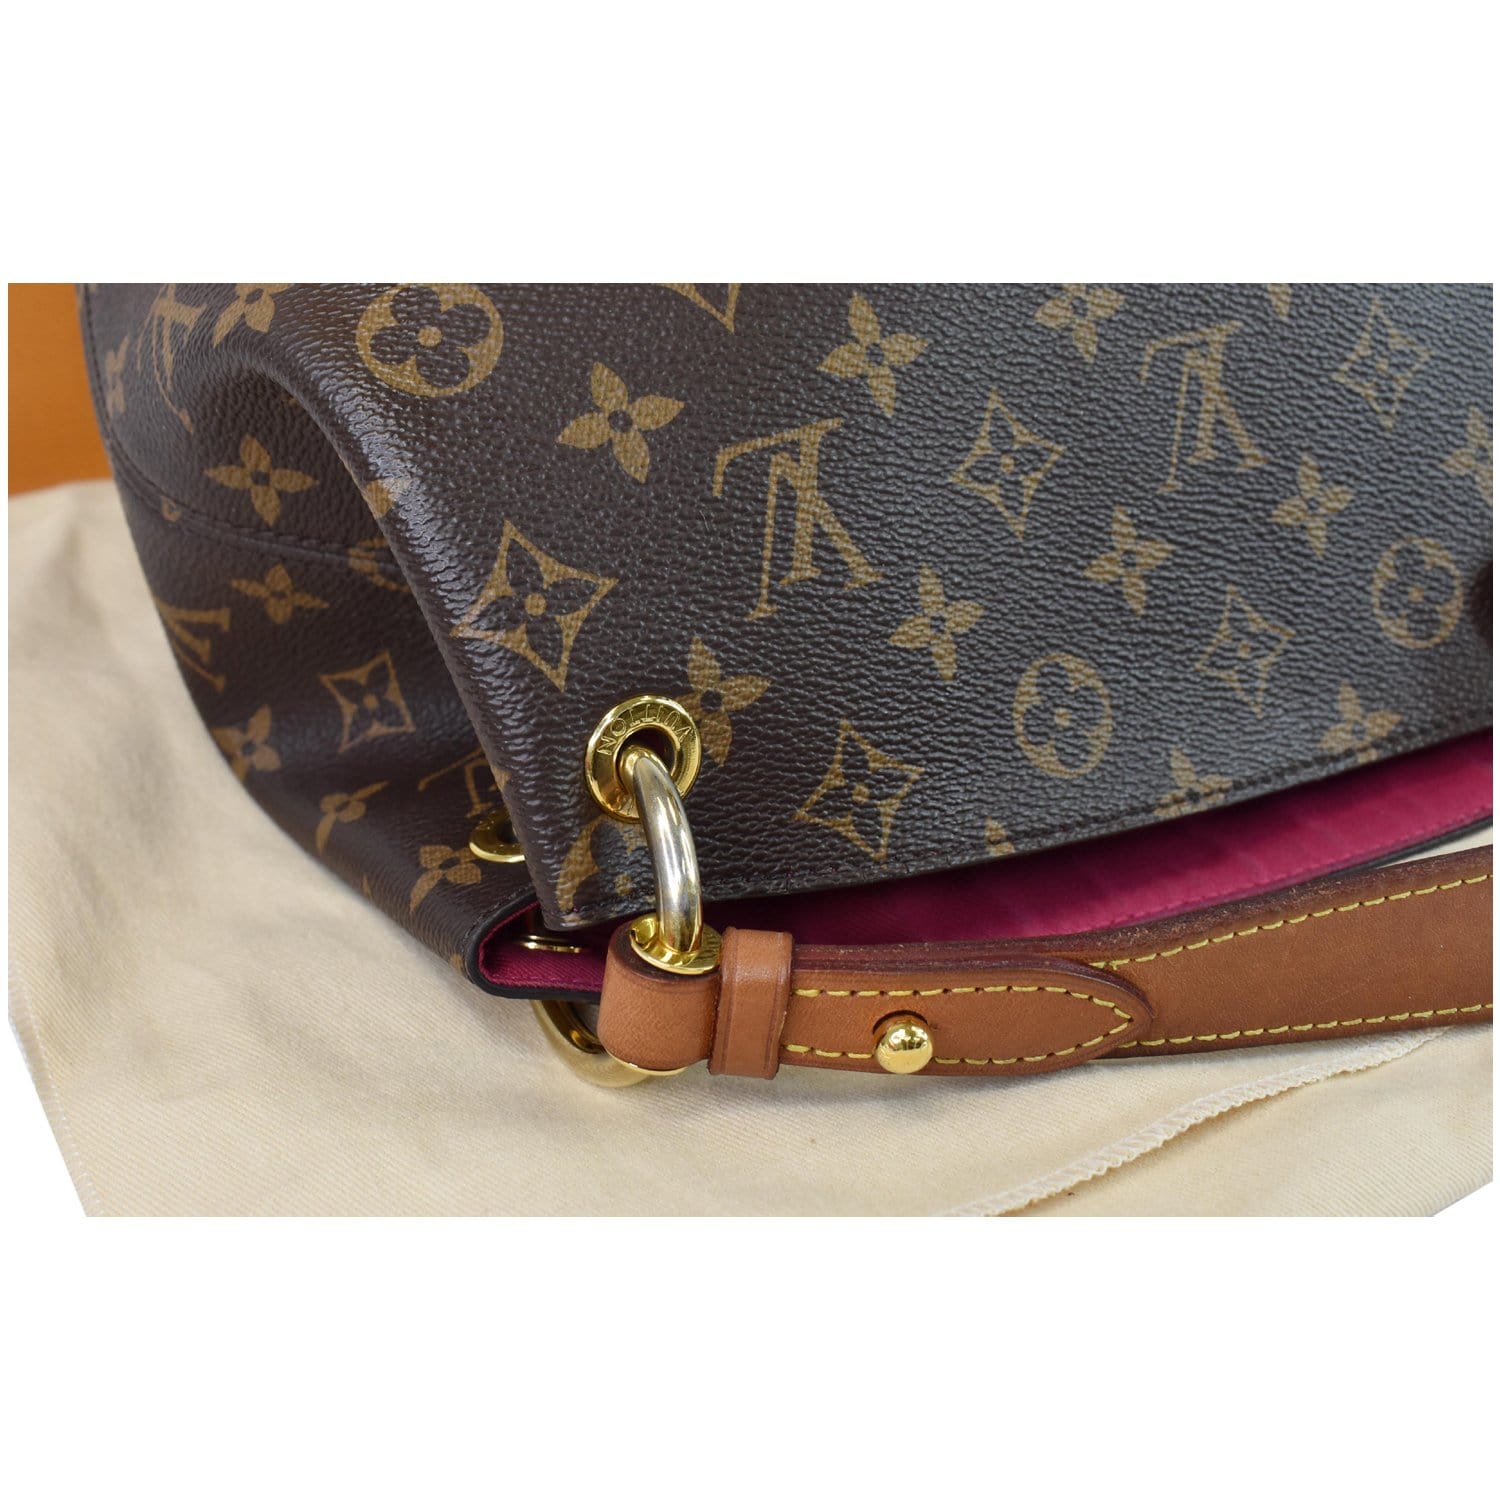 Louie Vuitton Artsy MM and Graceful MM side by side